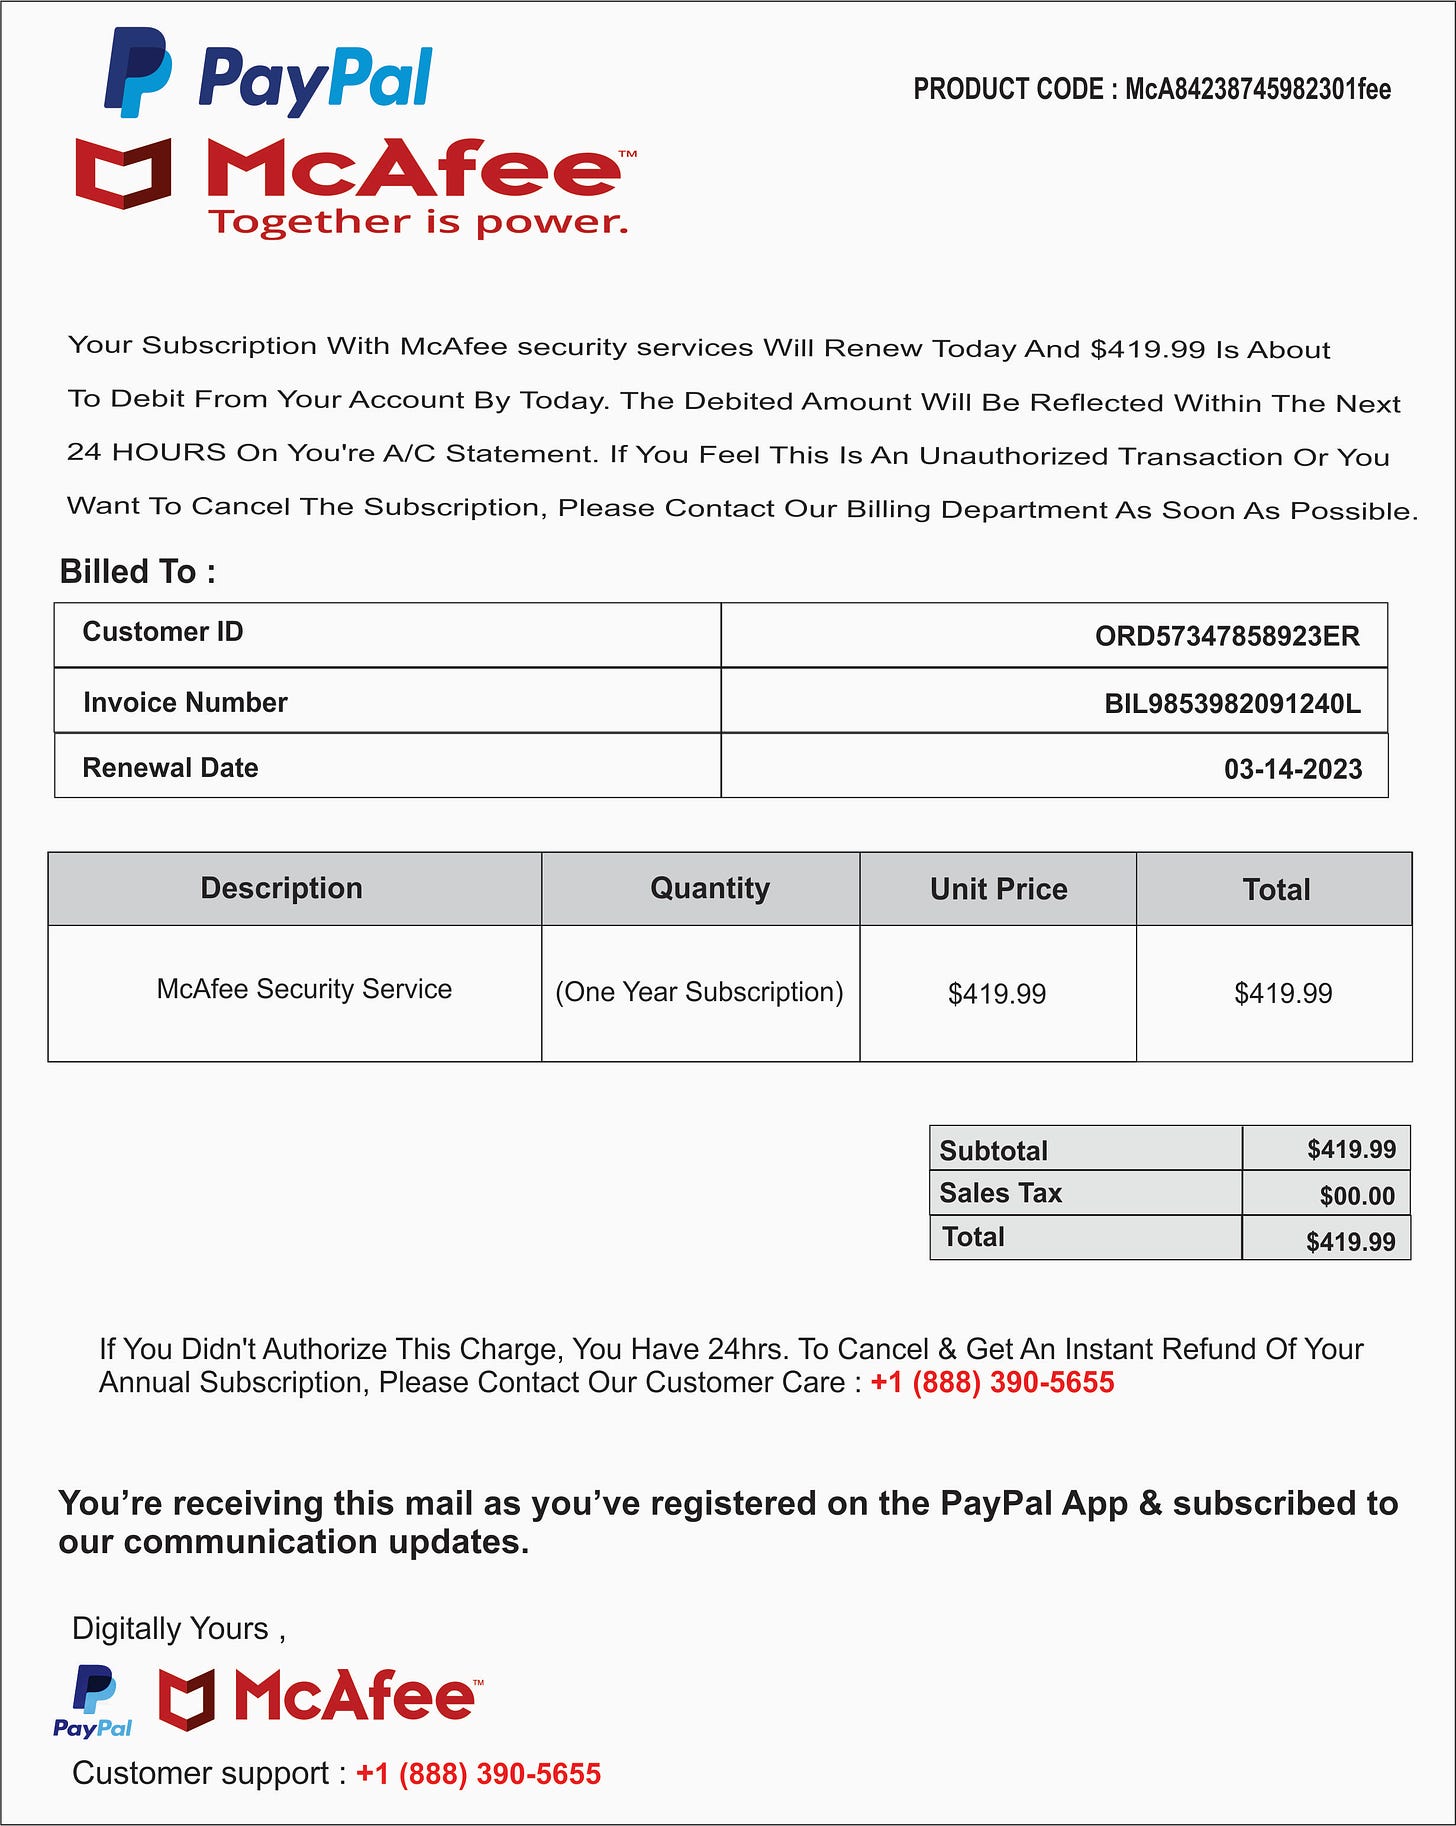 A fake invoice supposedly from McAfee and PayPal trying to scare the recipient into calling a toll-free number